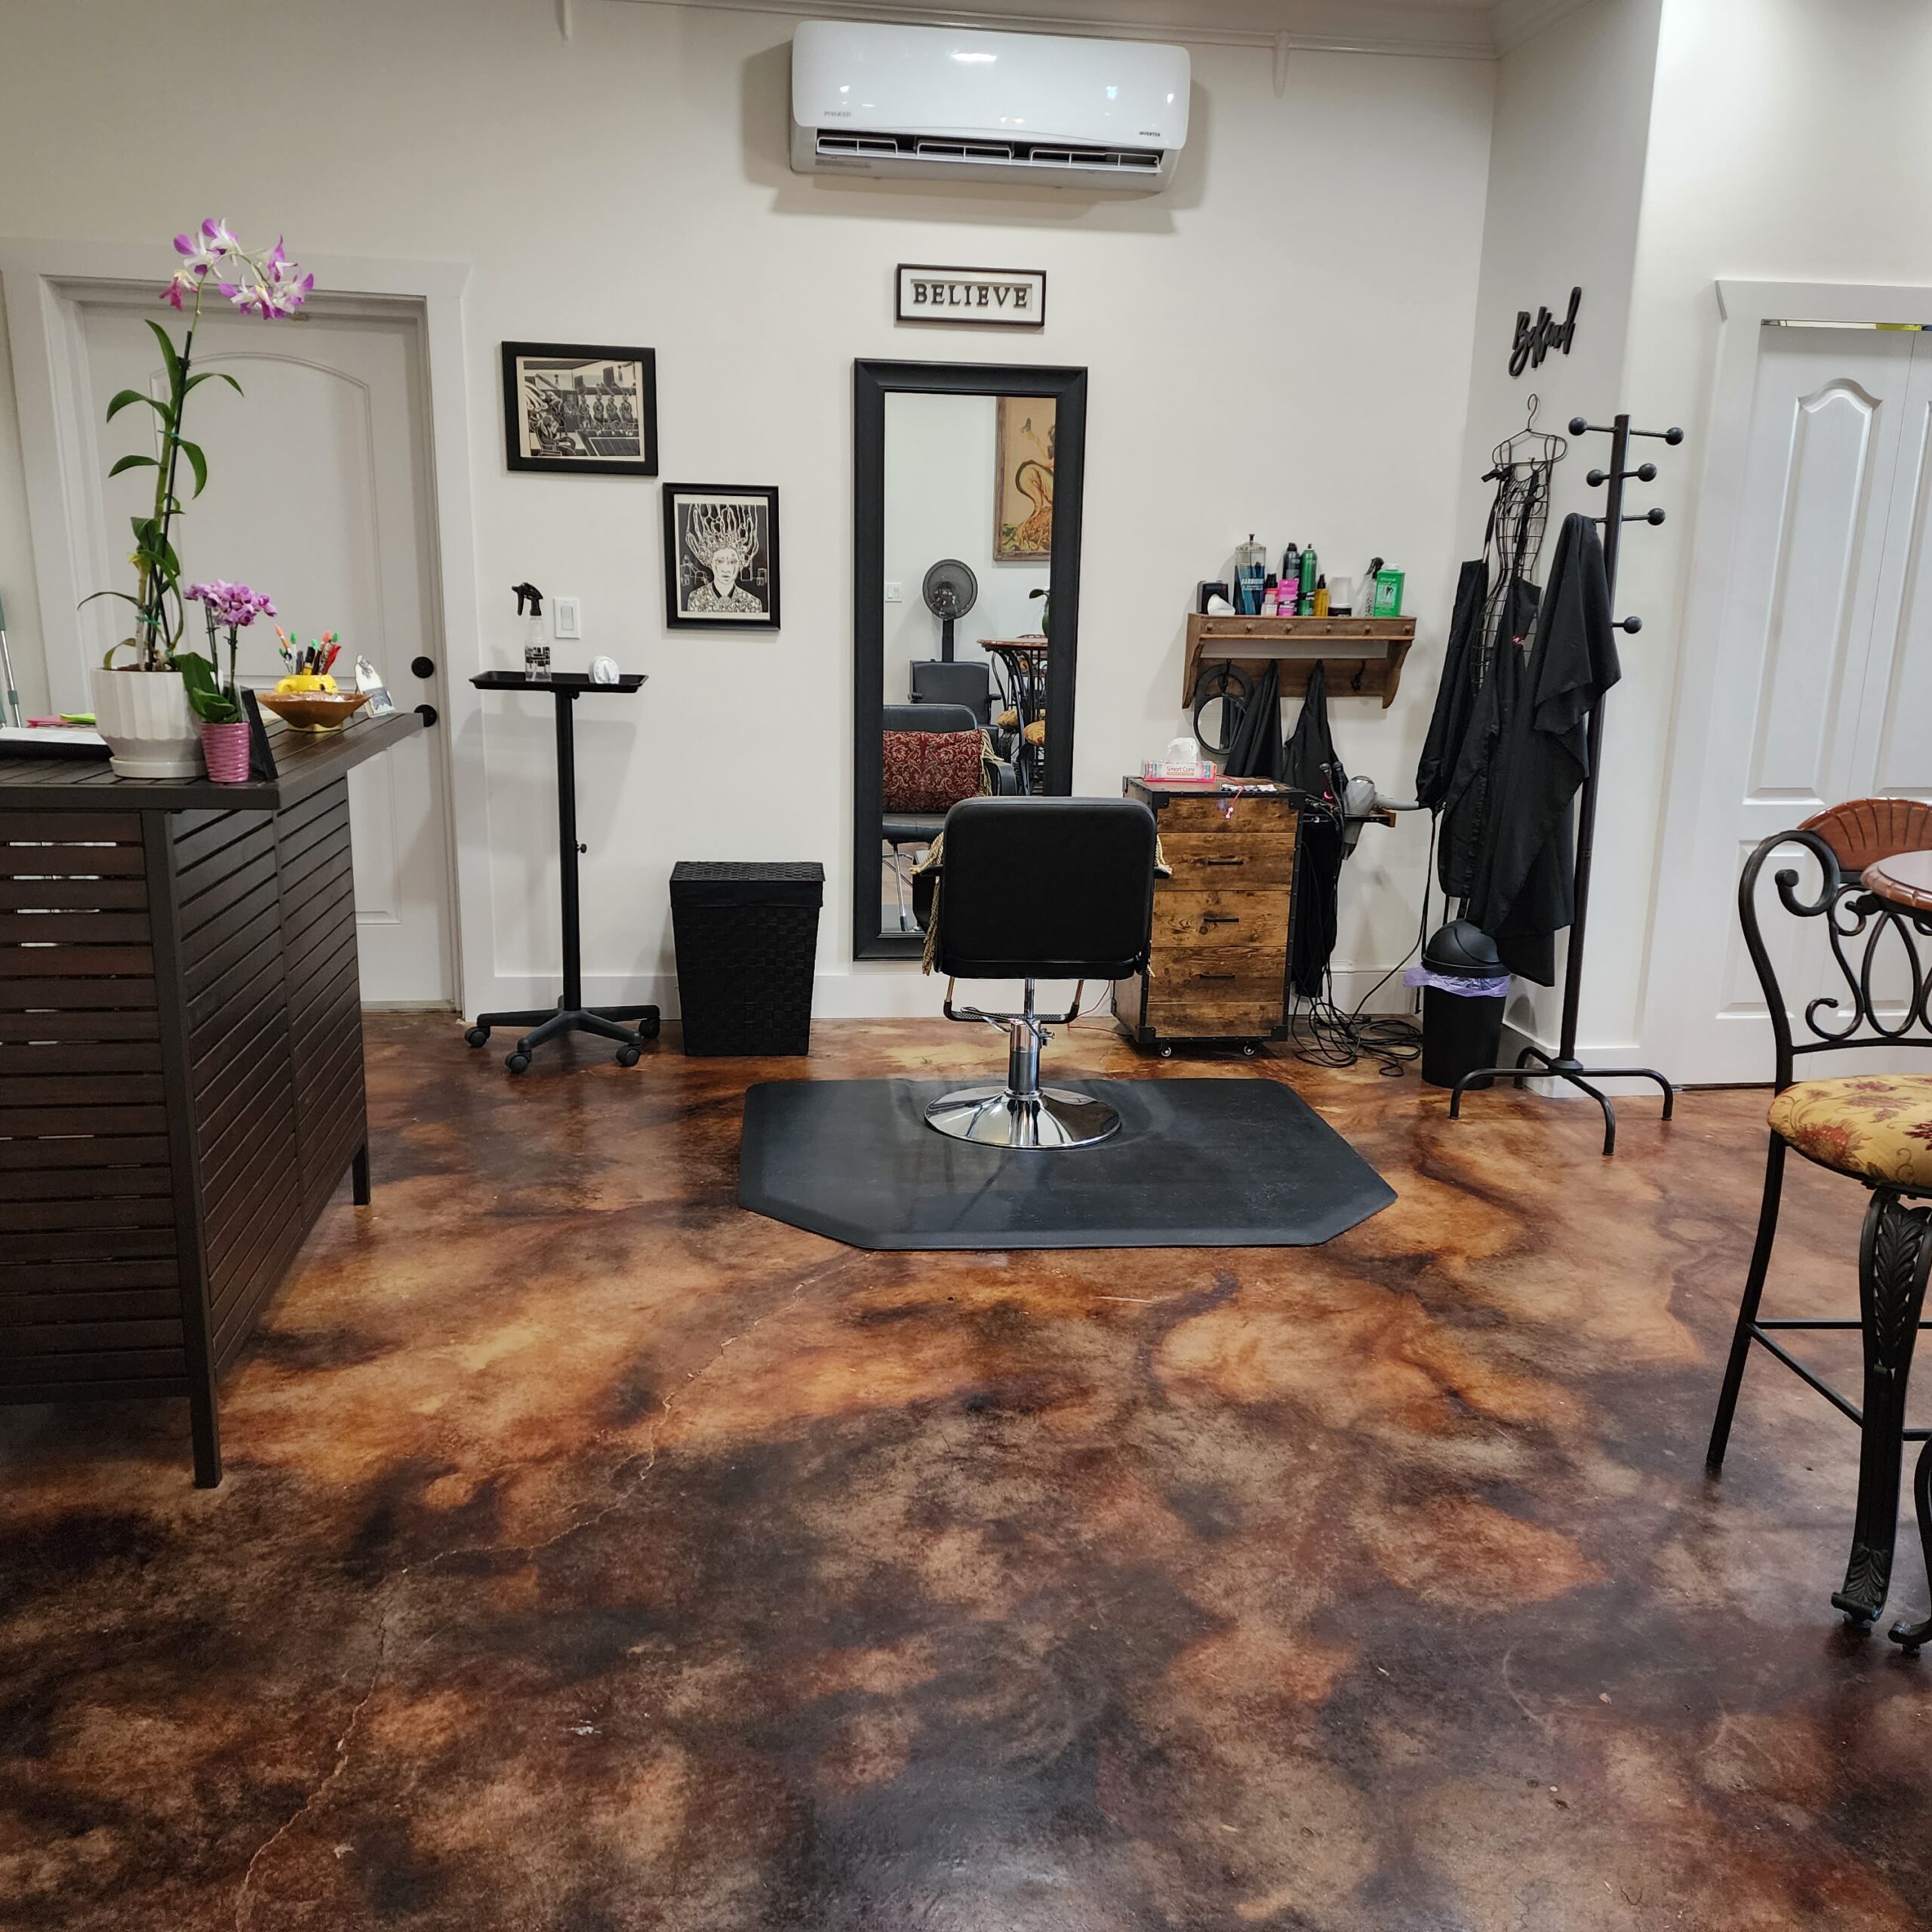 A cozy hair studio featuring a Coffee Brown and Malayan Buff acid-stained concrete floor, with swirling patterns that give the appearance of a well-worn leather